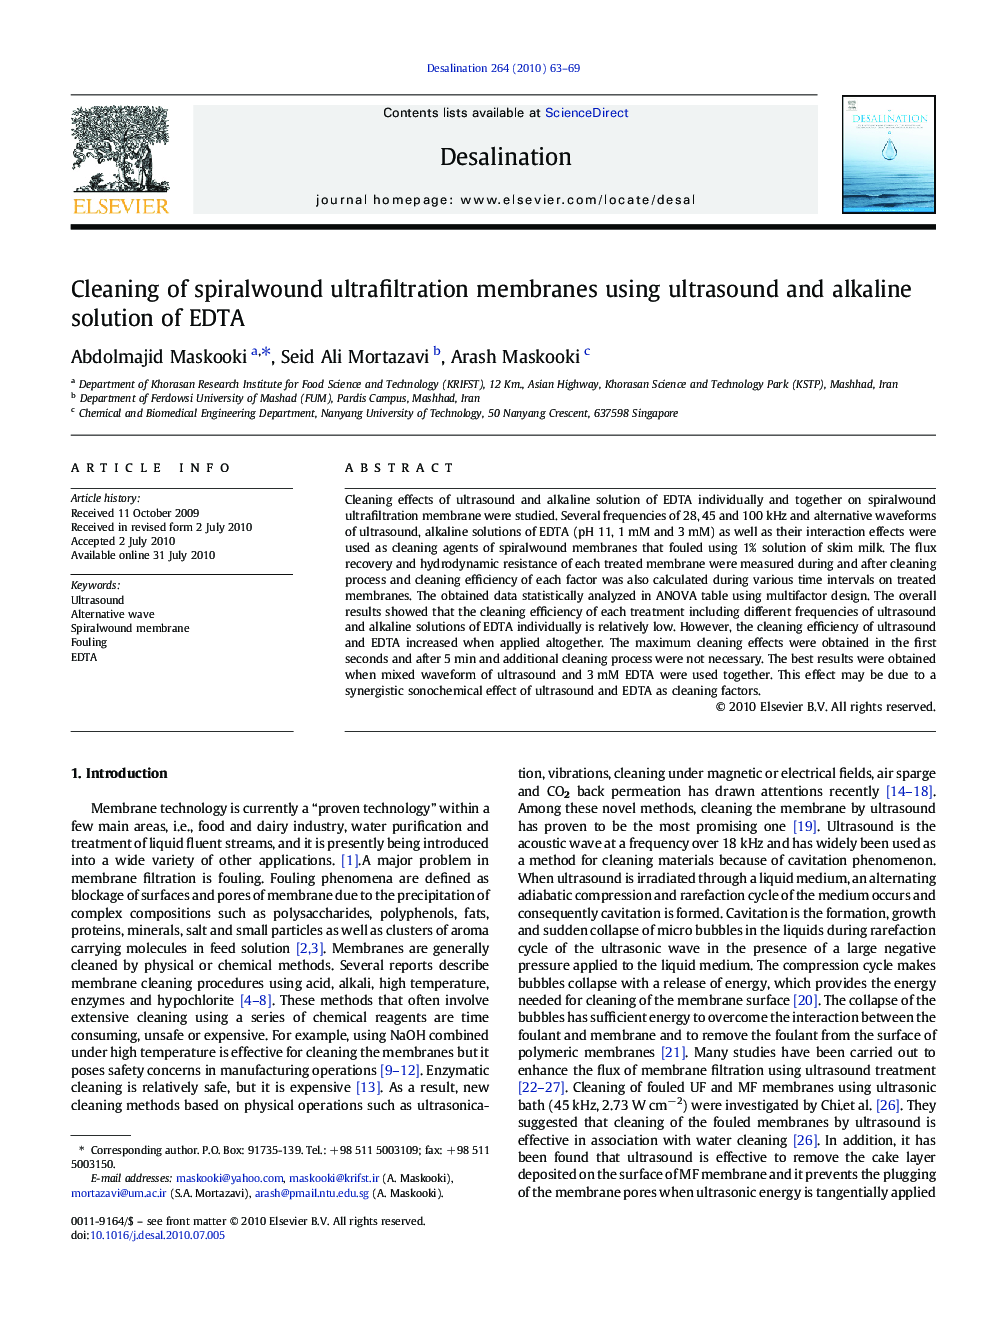 Cleaning of spiralwound ultrafiltration membranes using ultrasound and alkaline solution of EDTA